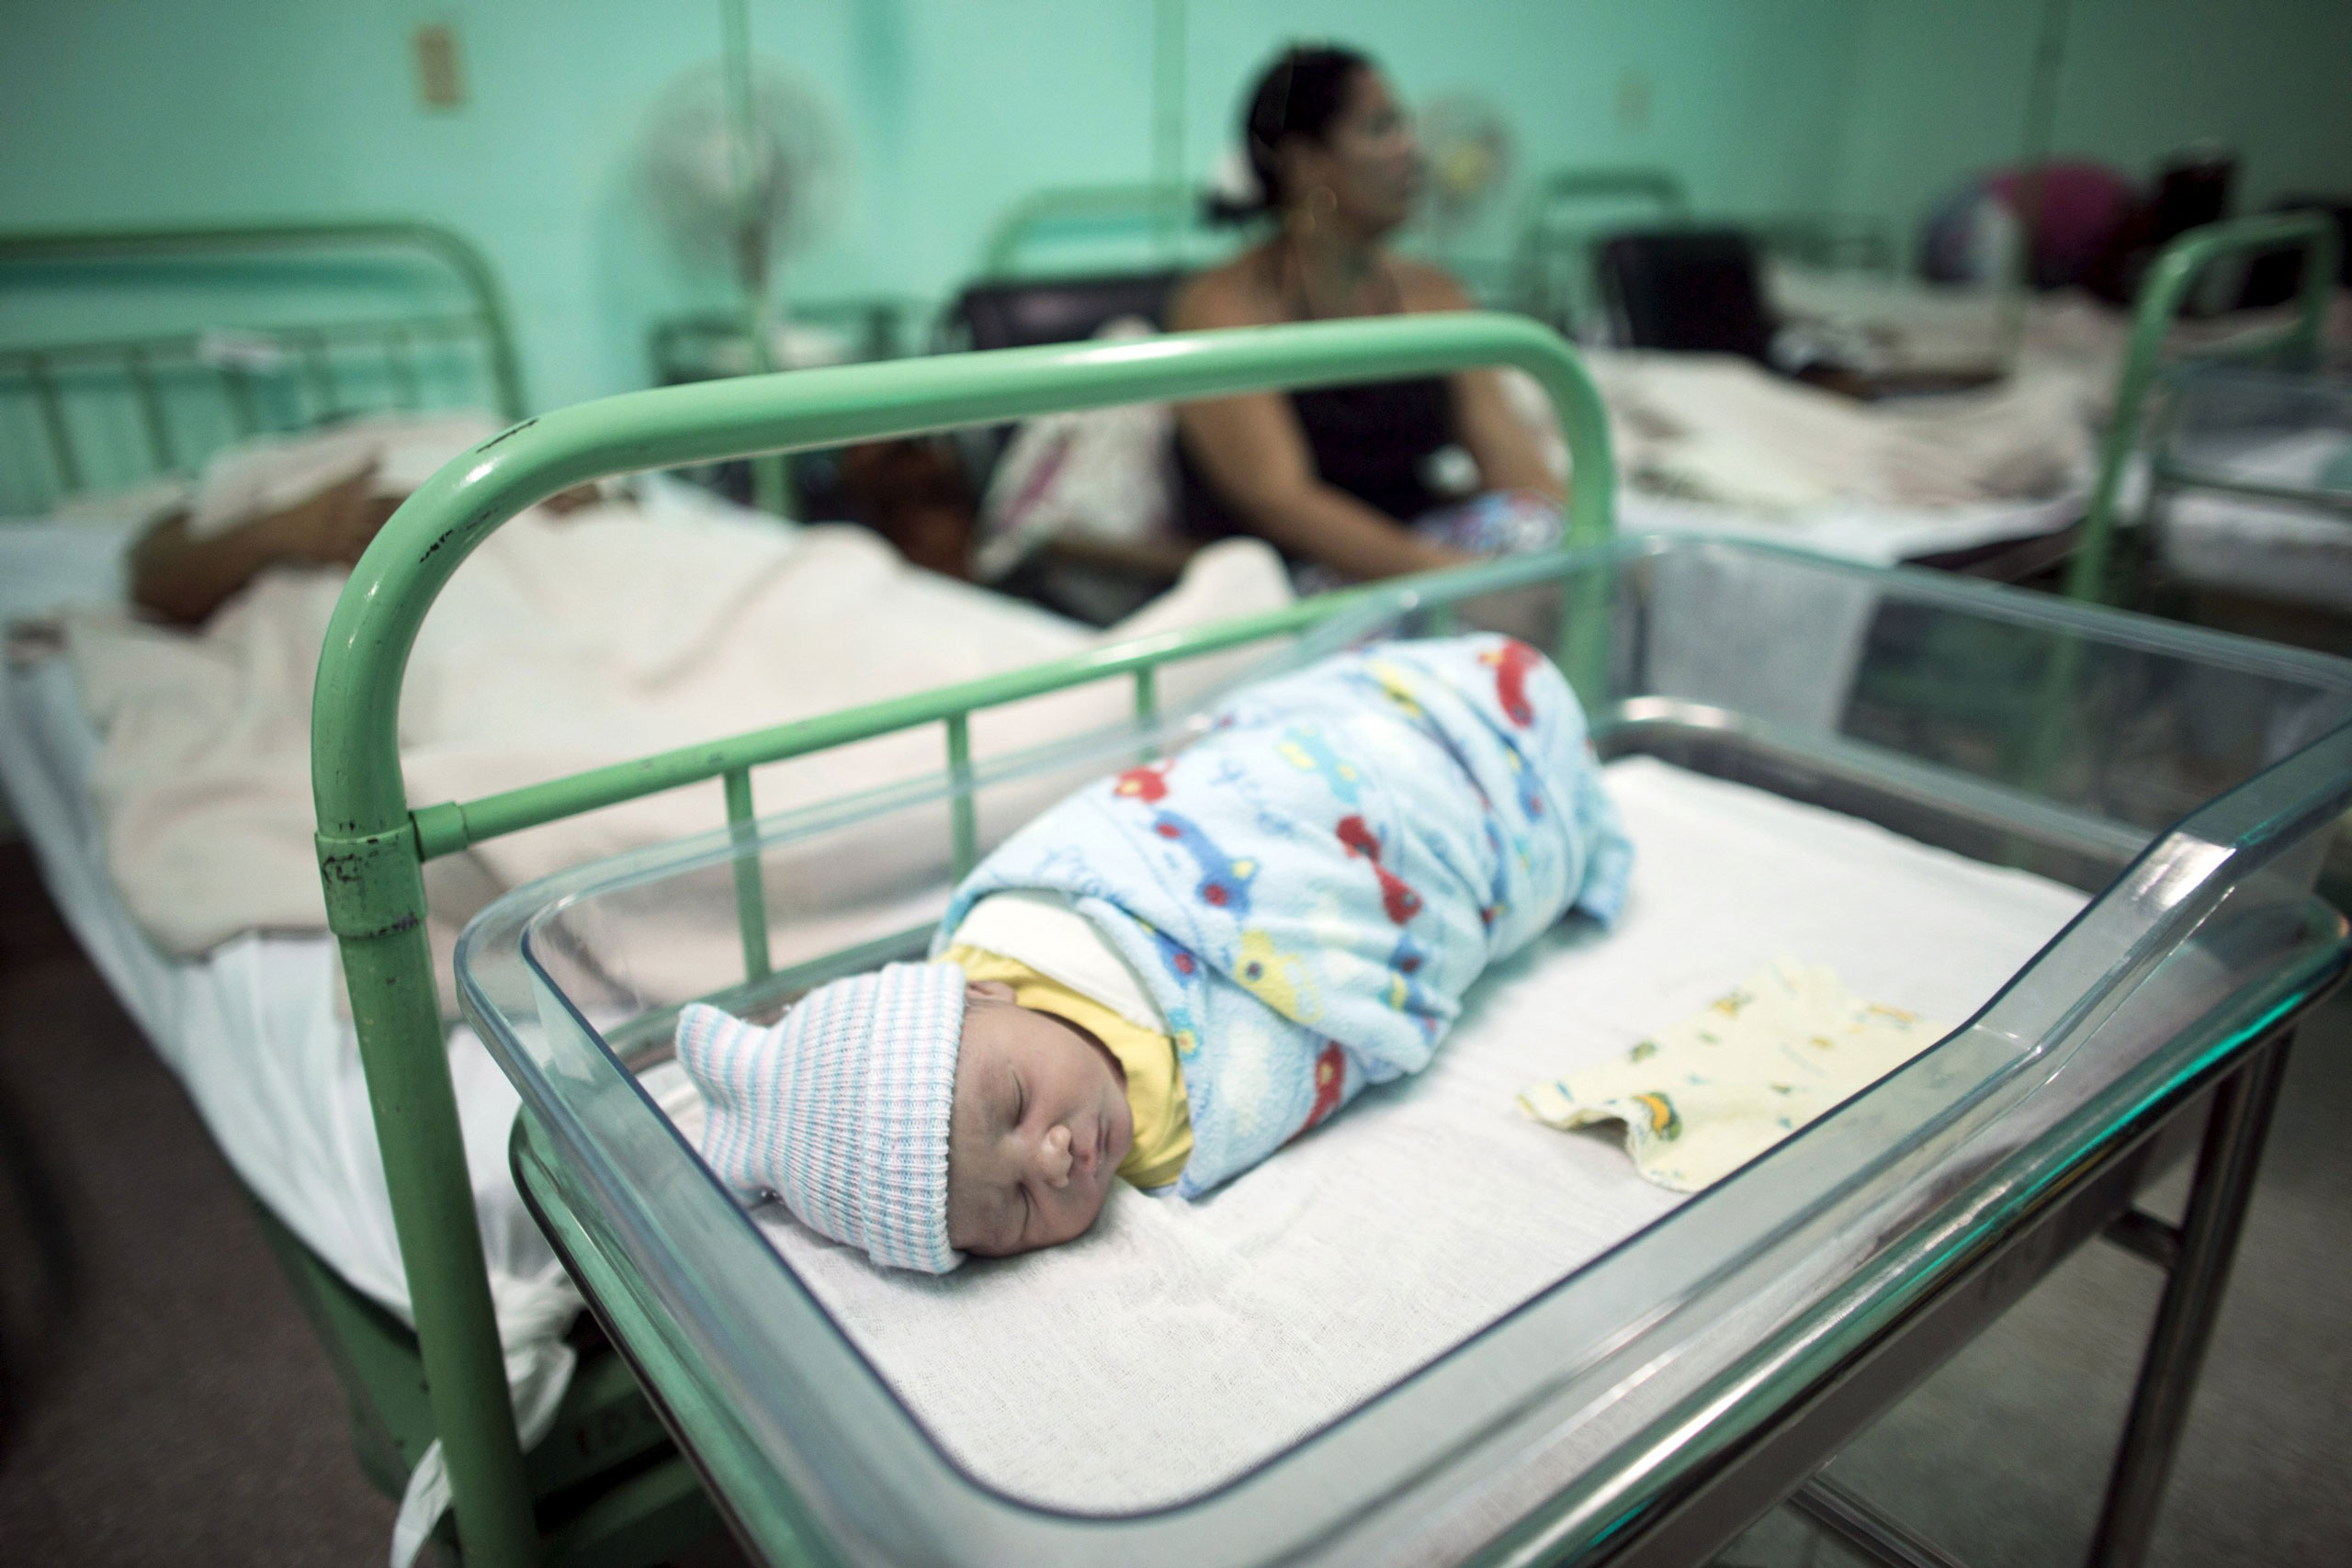 A new born baby rests beside his mother at the Ana Betancourt de Mora Hospital in Camaguey, Cuba, on June 19, 2015. (Alexandre Meneghini—Reuters)